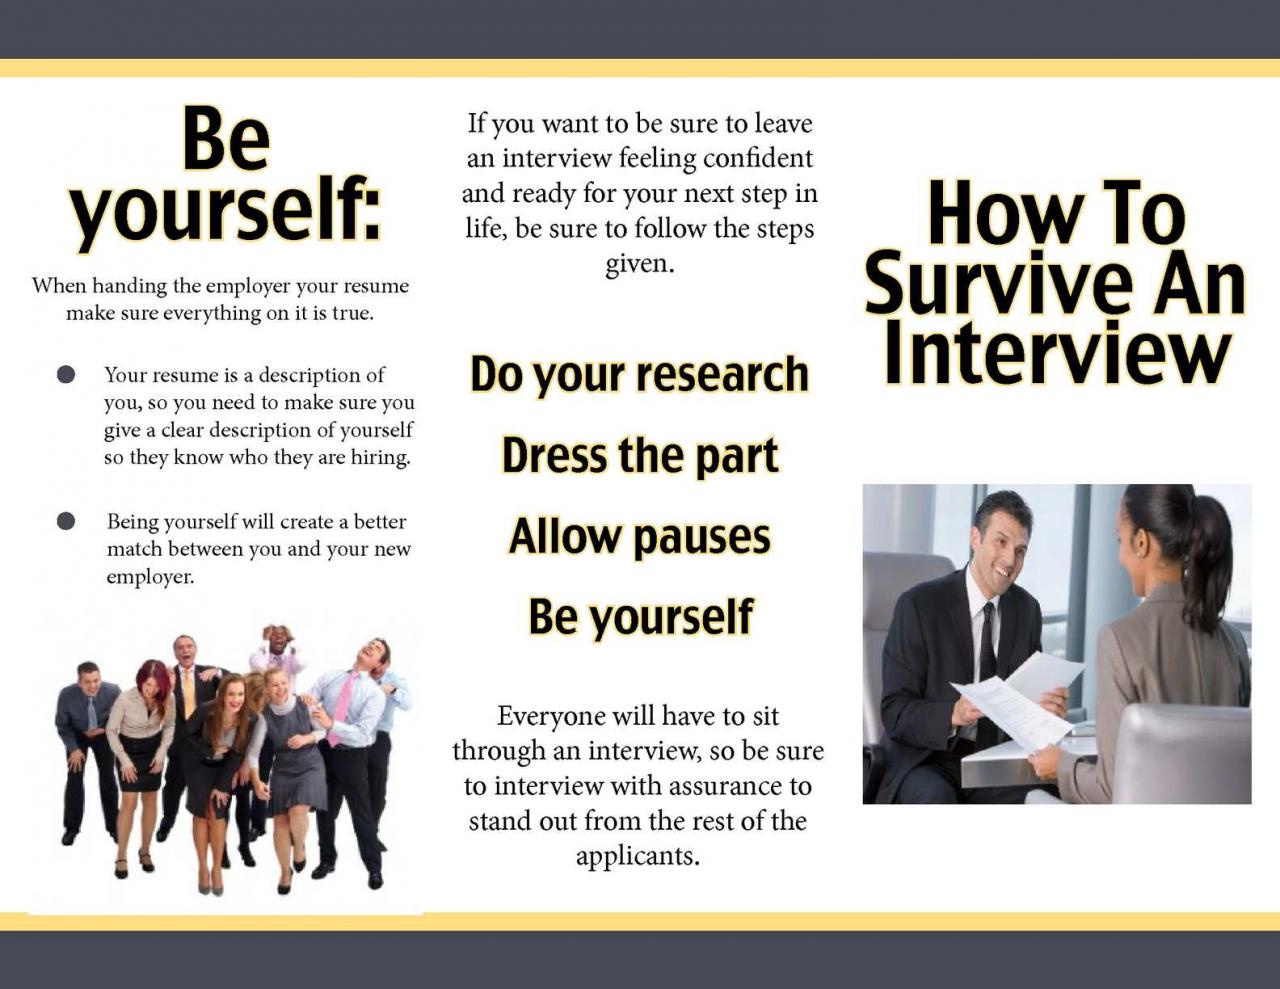 How to survive an interview and get the job